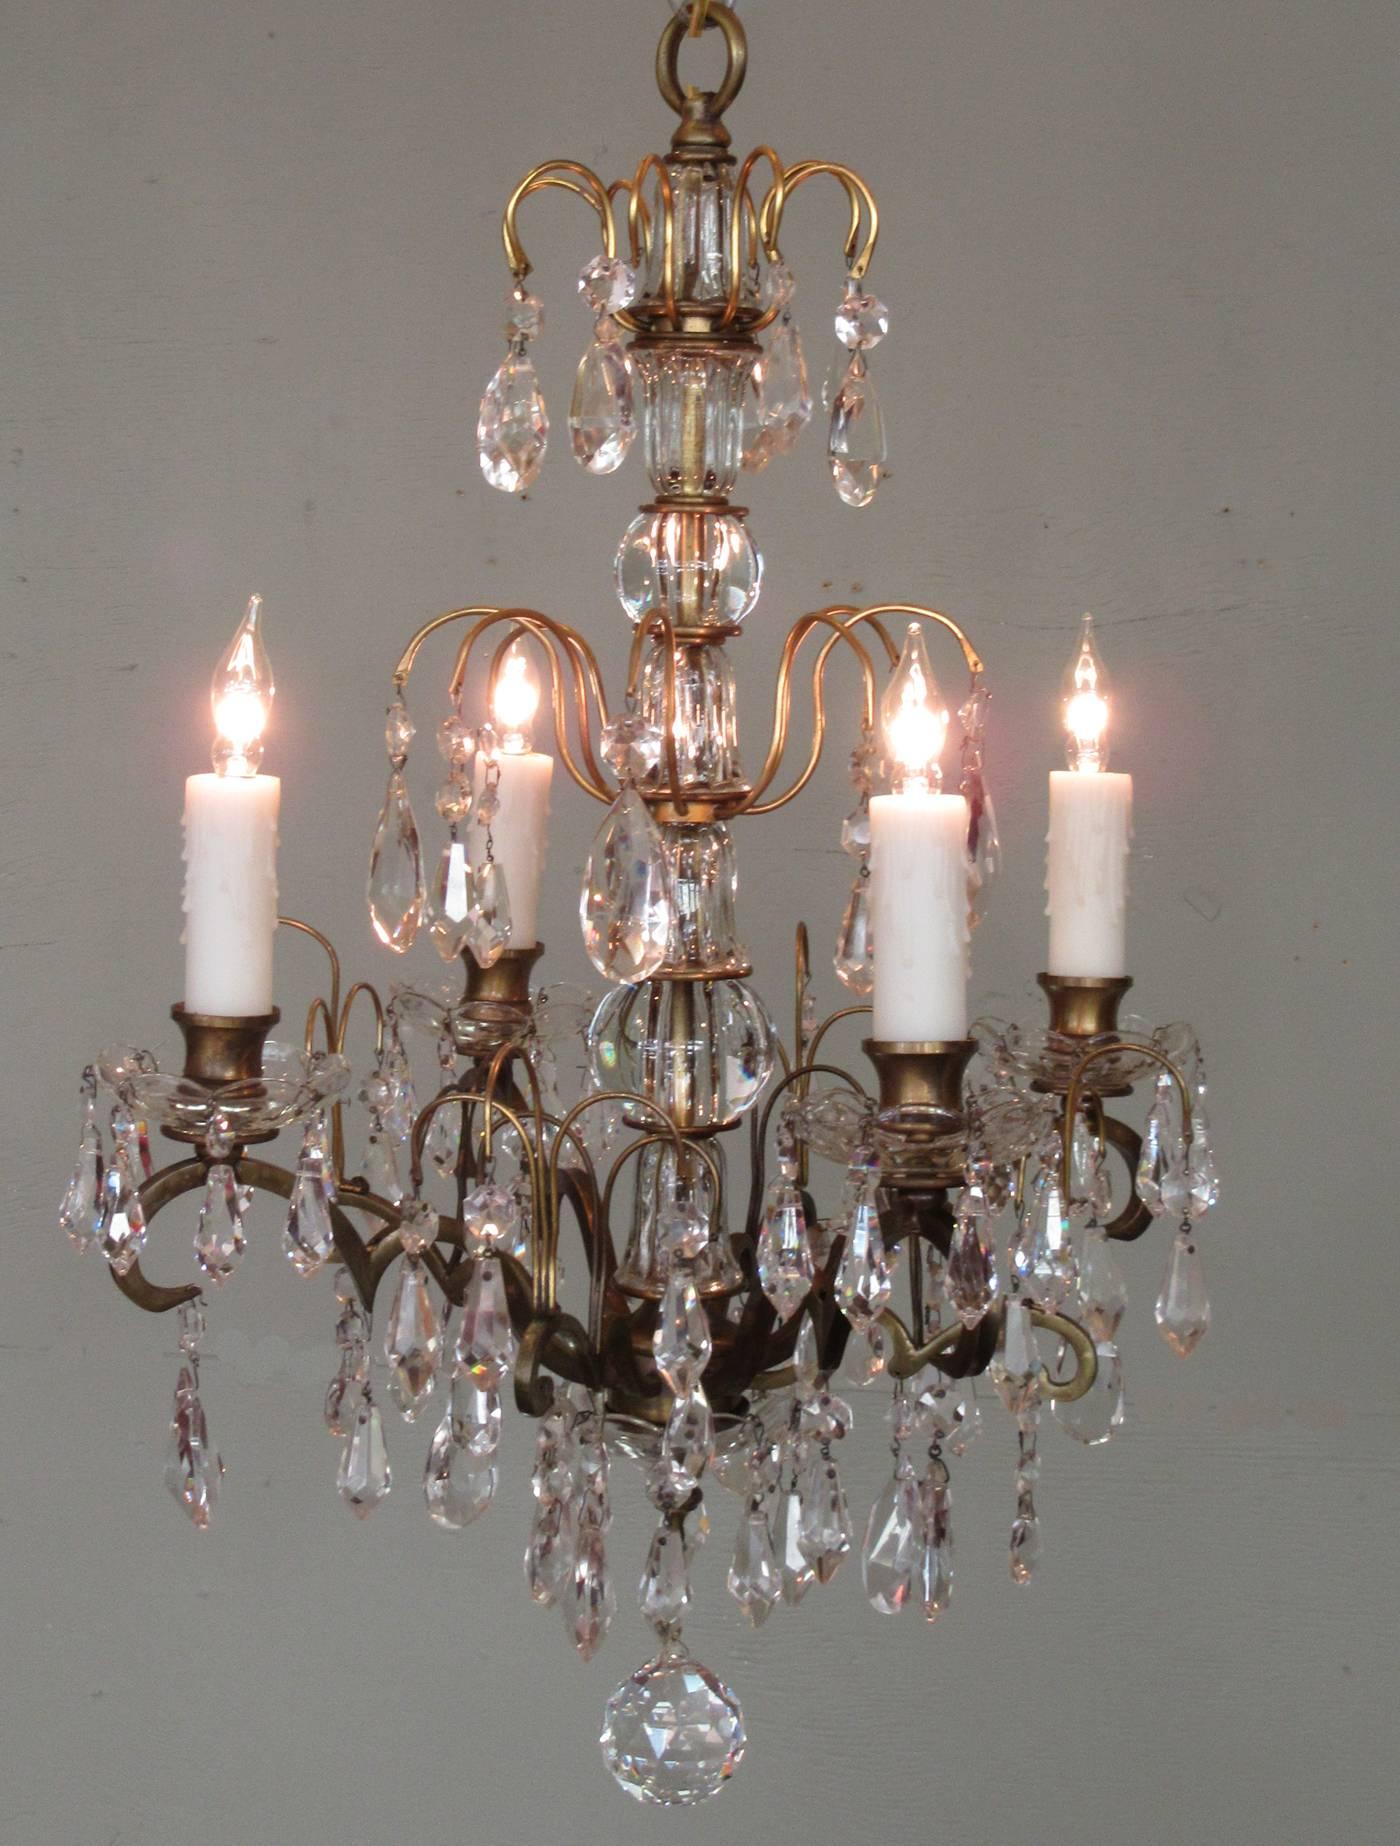 A smaller scale Italian chandelier, circa 1910, with bronze and glass stem adorned with crystal pendants, four candle bulbs with crystal and glass bobeches and finished with a cut crystal ball. The chandelier has been recently rewired with new